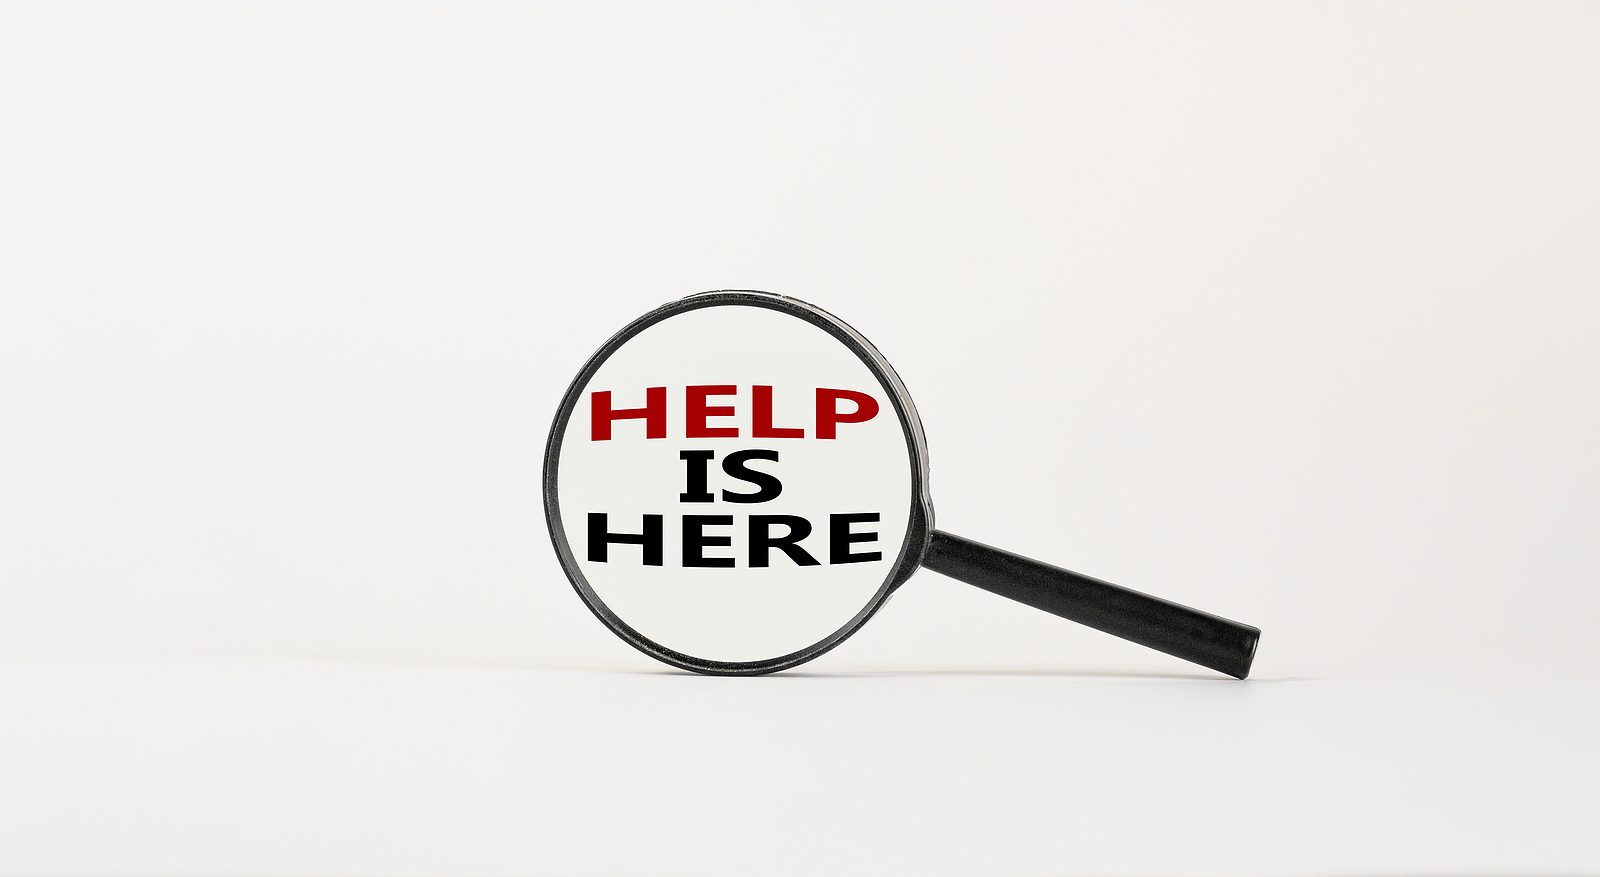 Here to help symbol. Magnifying glass with text 'help is here' on beautiful white background. Business and help is here concept, copy space.